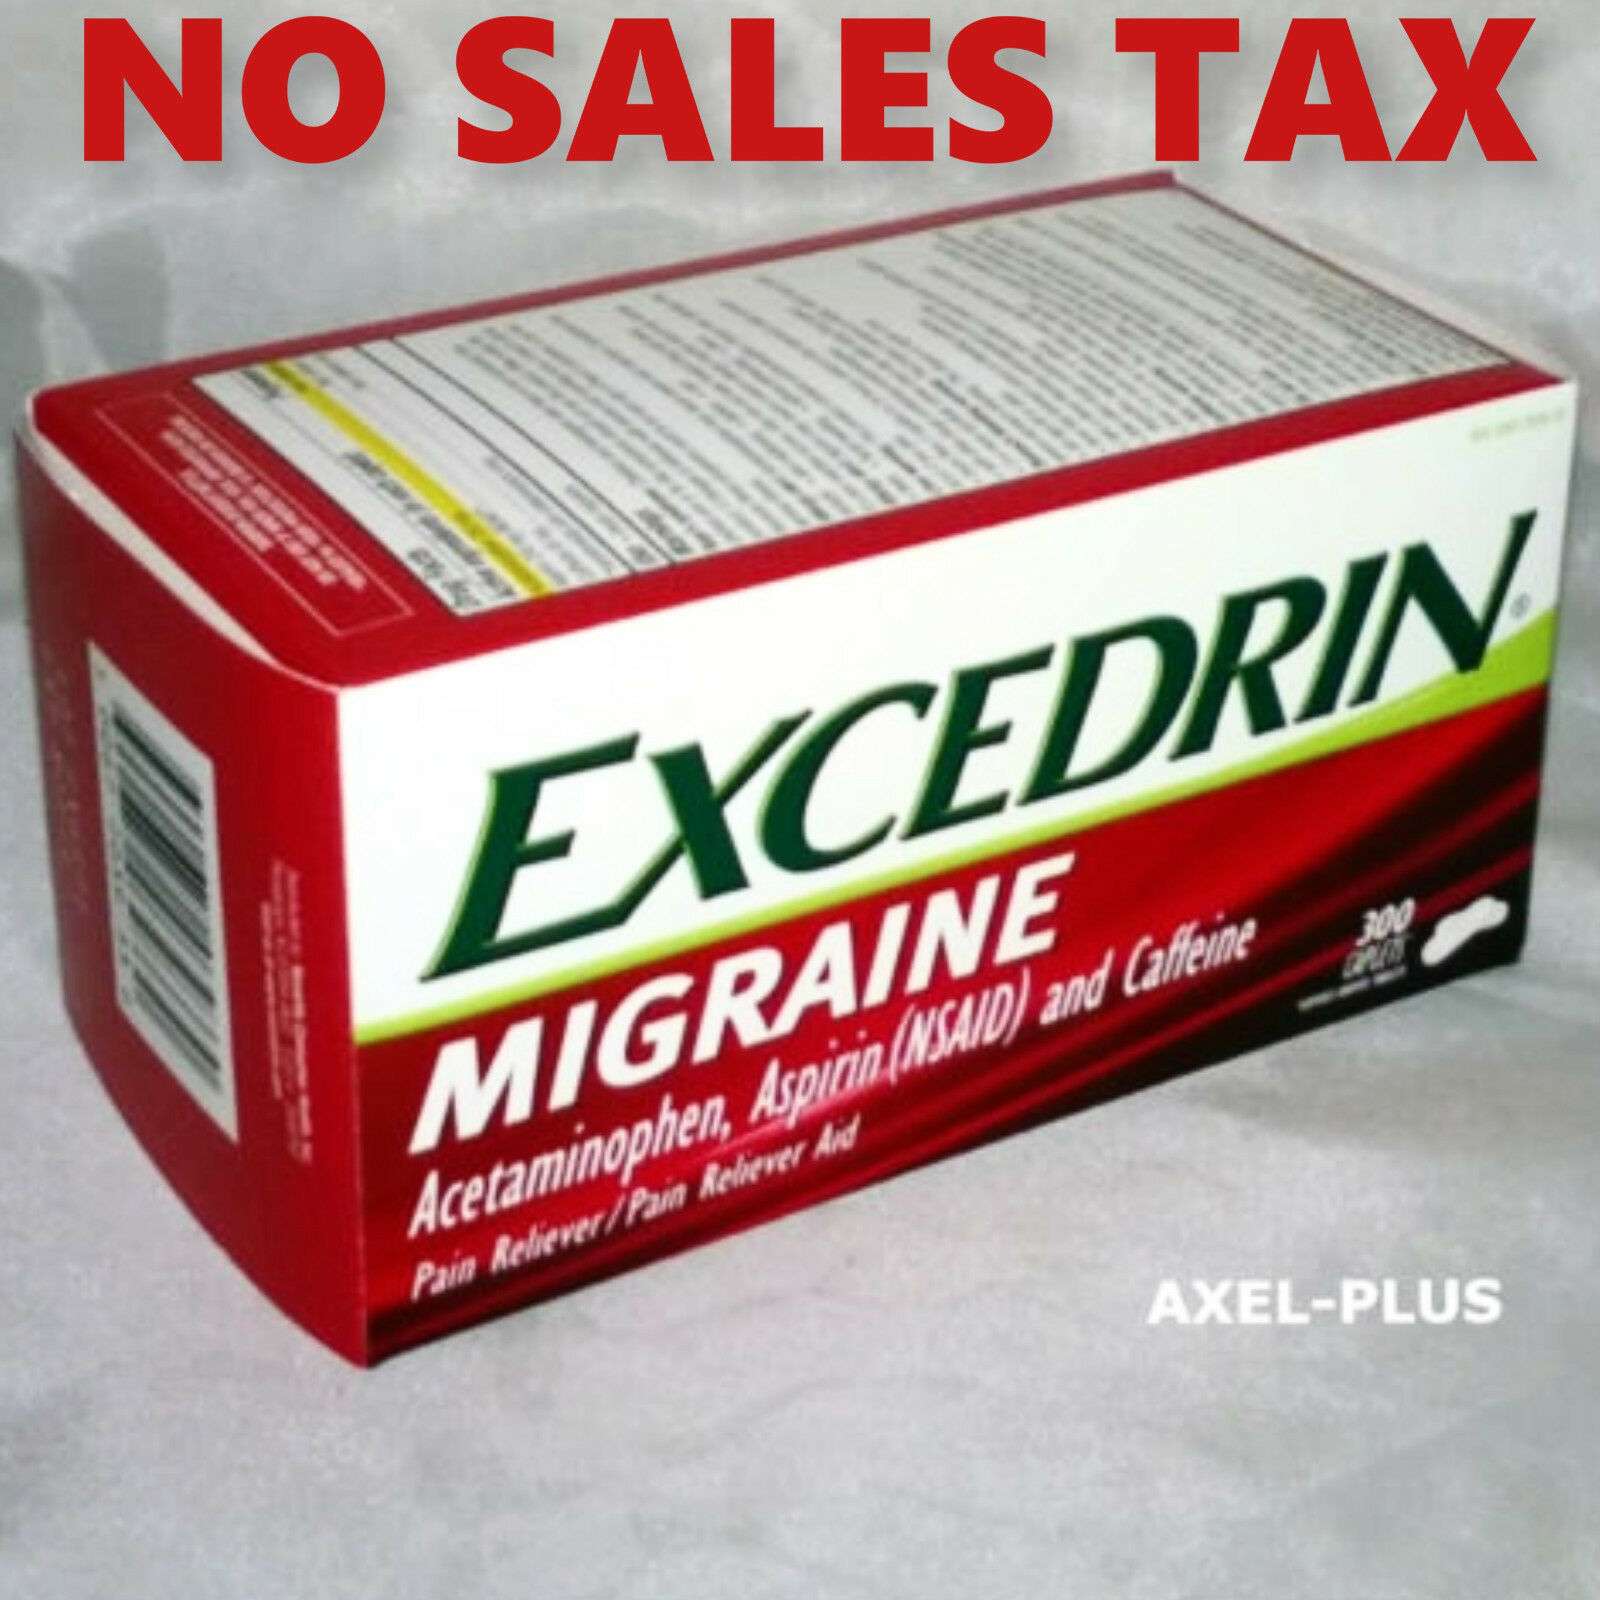 Caffeine content excedrin: The request could not be satisfied